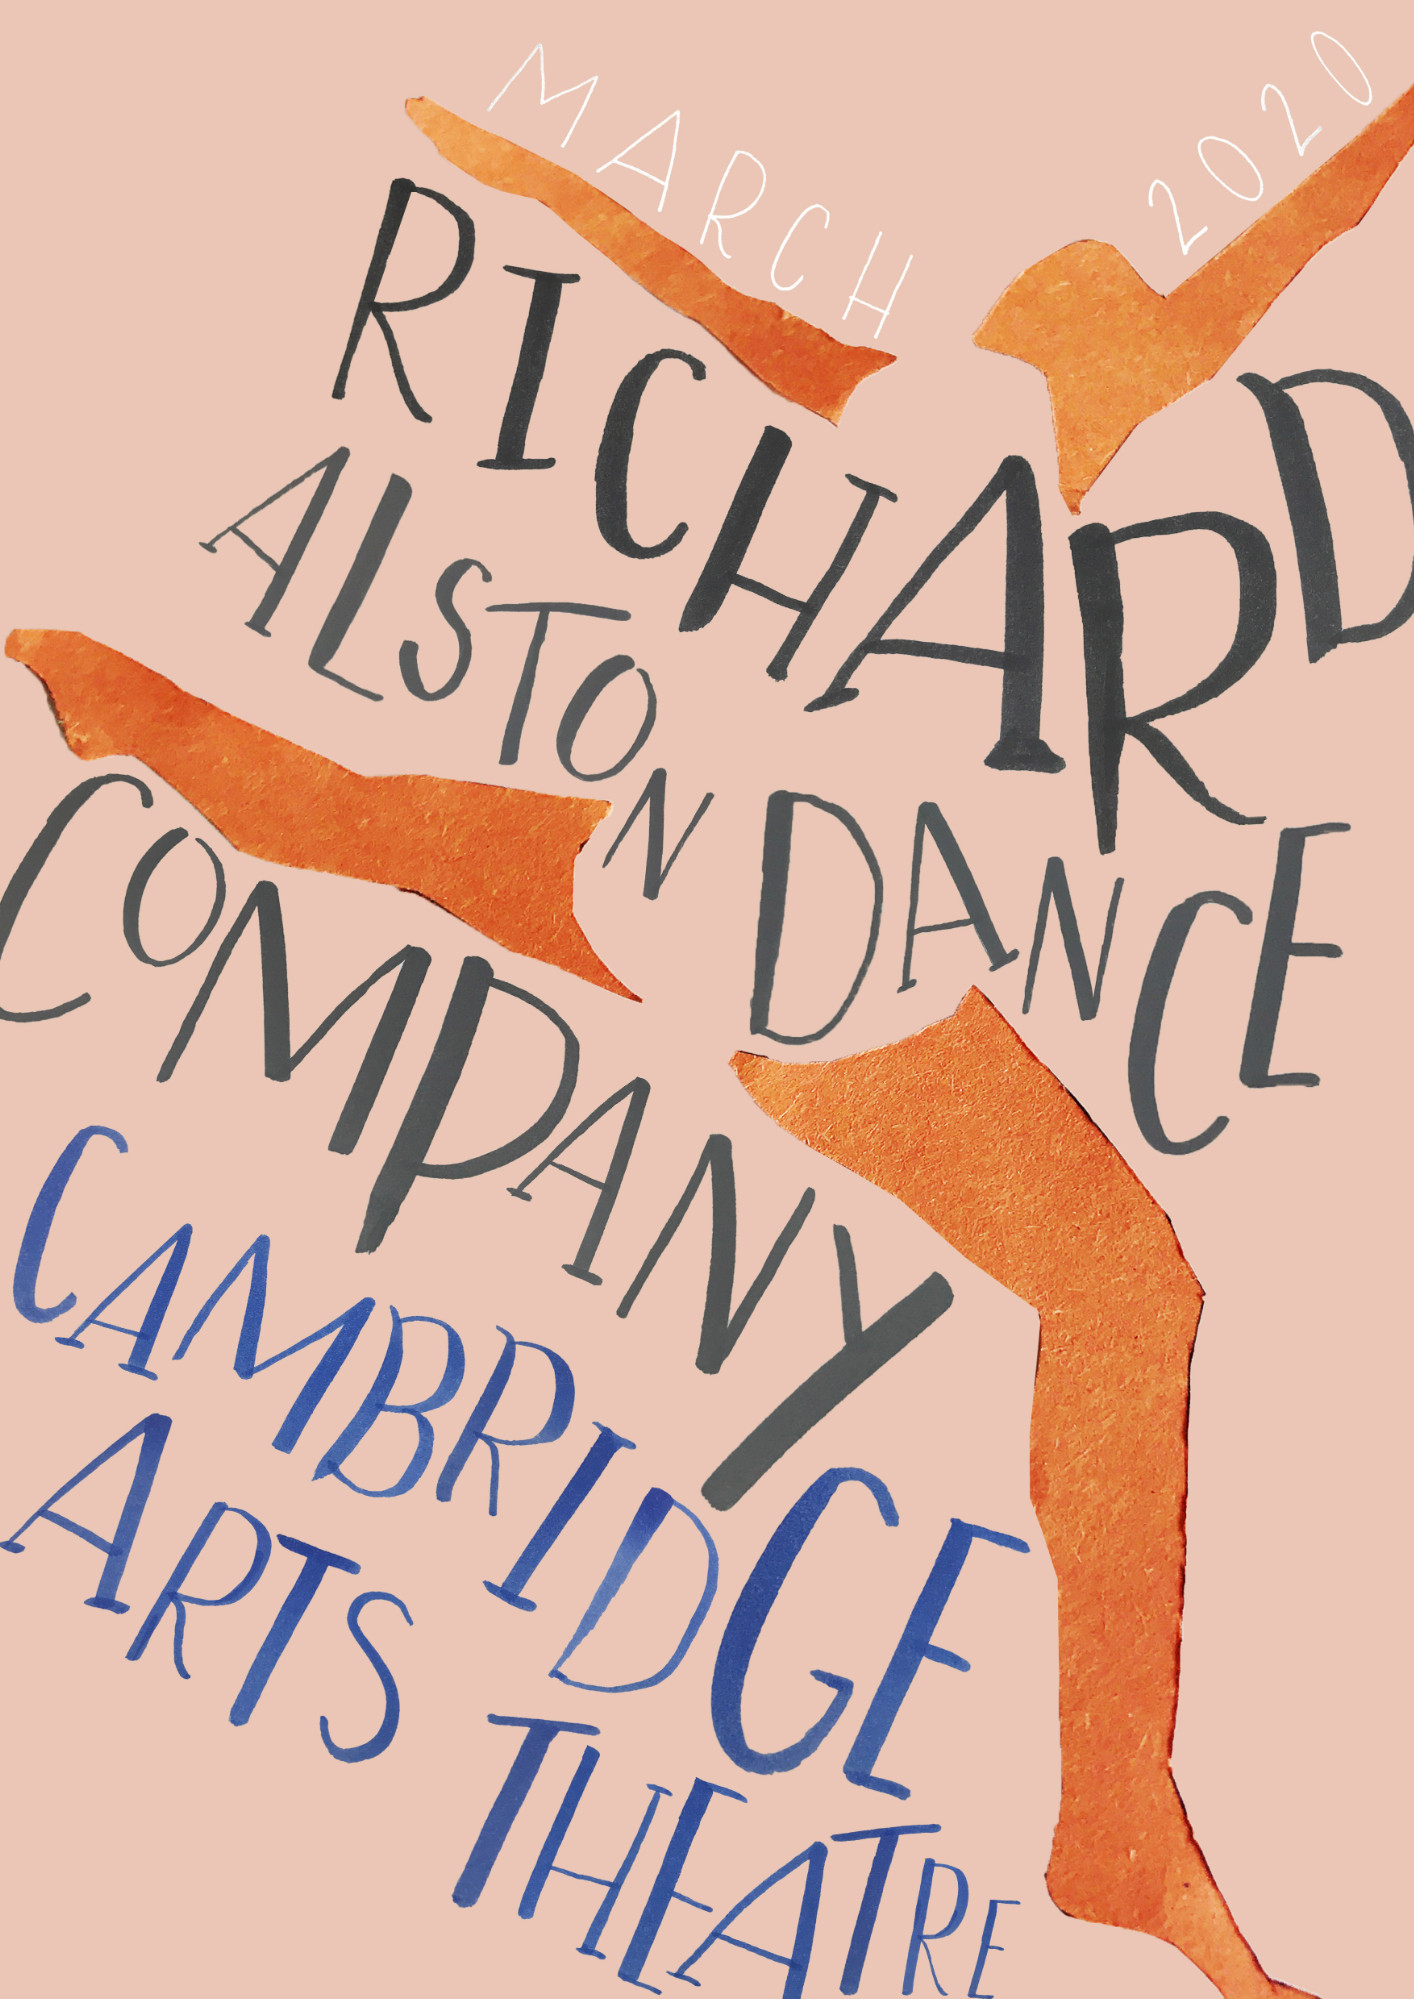 "Richard Alston Dance Company". The negative space within the paper cut dancer provided an excellent space for the hand lettered type to sit. The dancer reaches for each corner of the poster creating a dynamic image that celebrates the energy of the dance show. Lauren Maxwell.